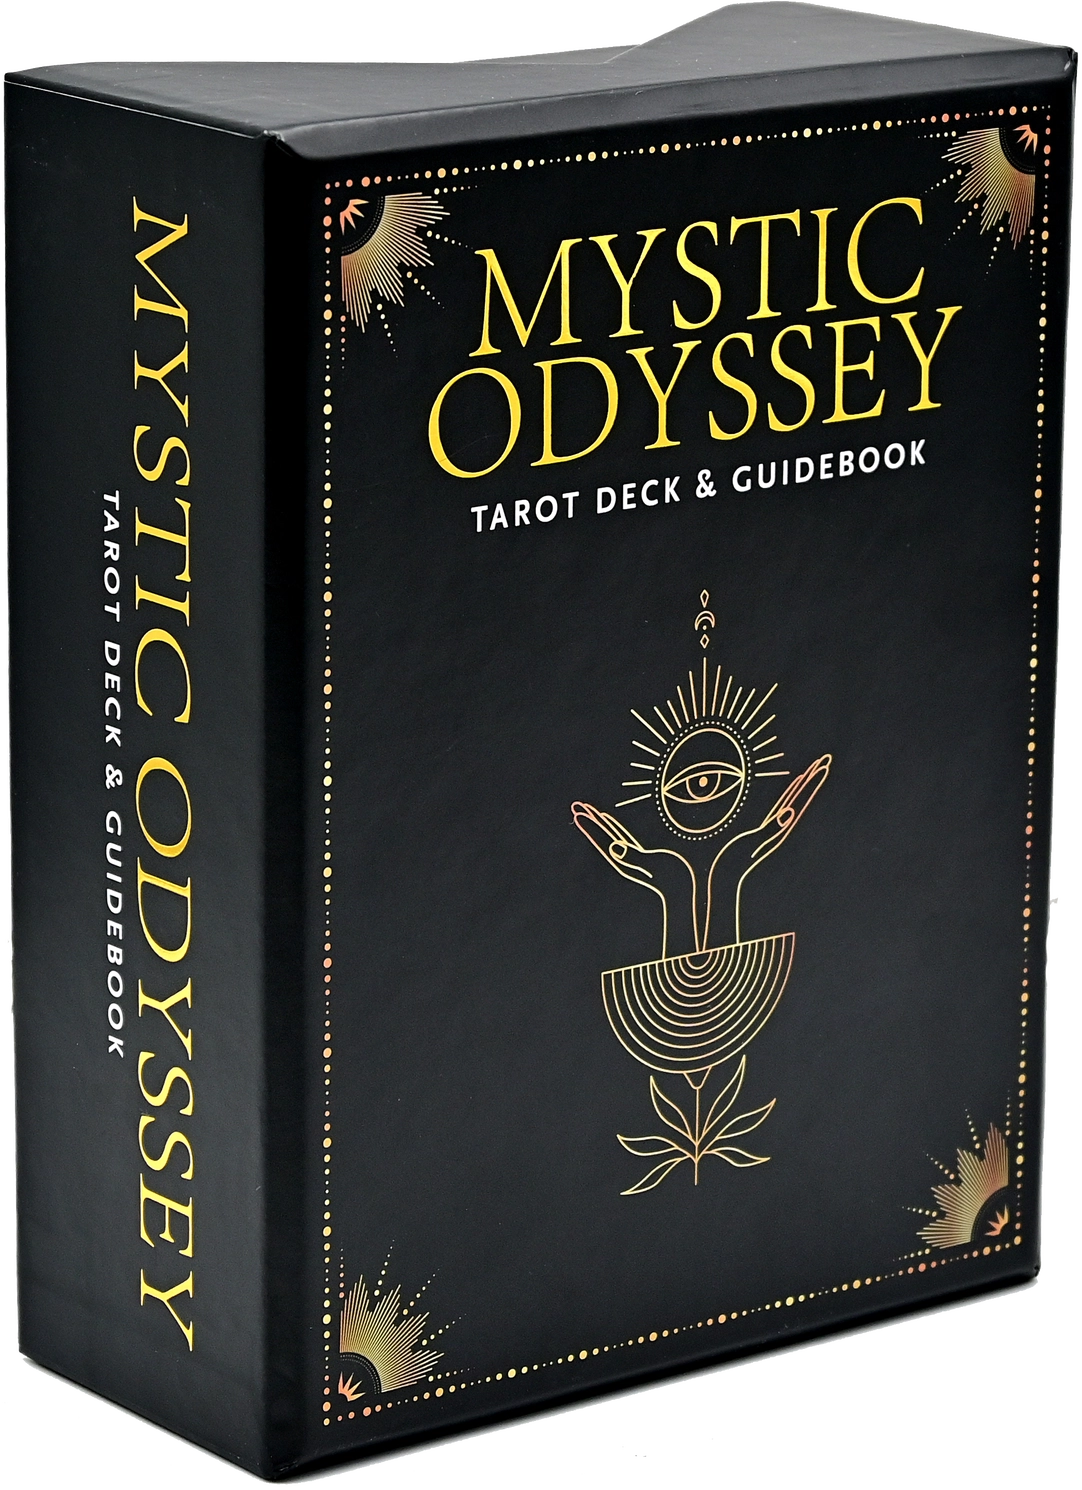 Mystic Odyssey Tarot Deck and Guide Book